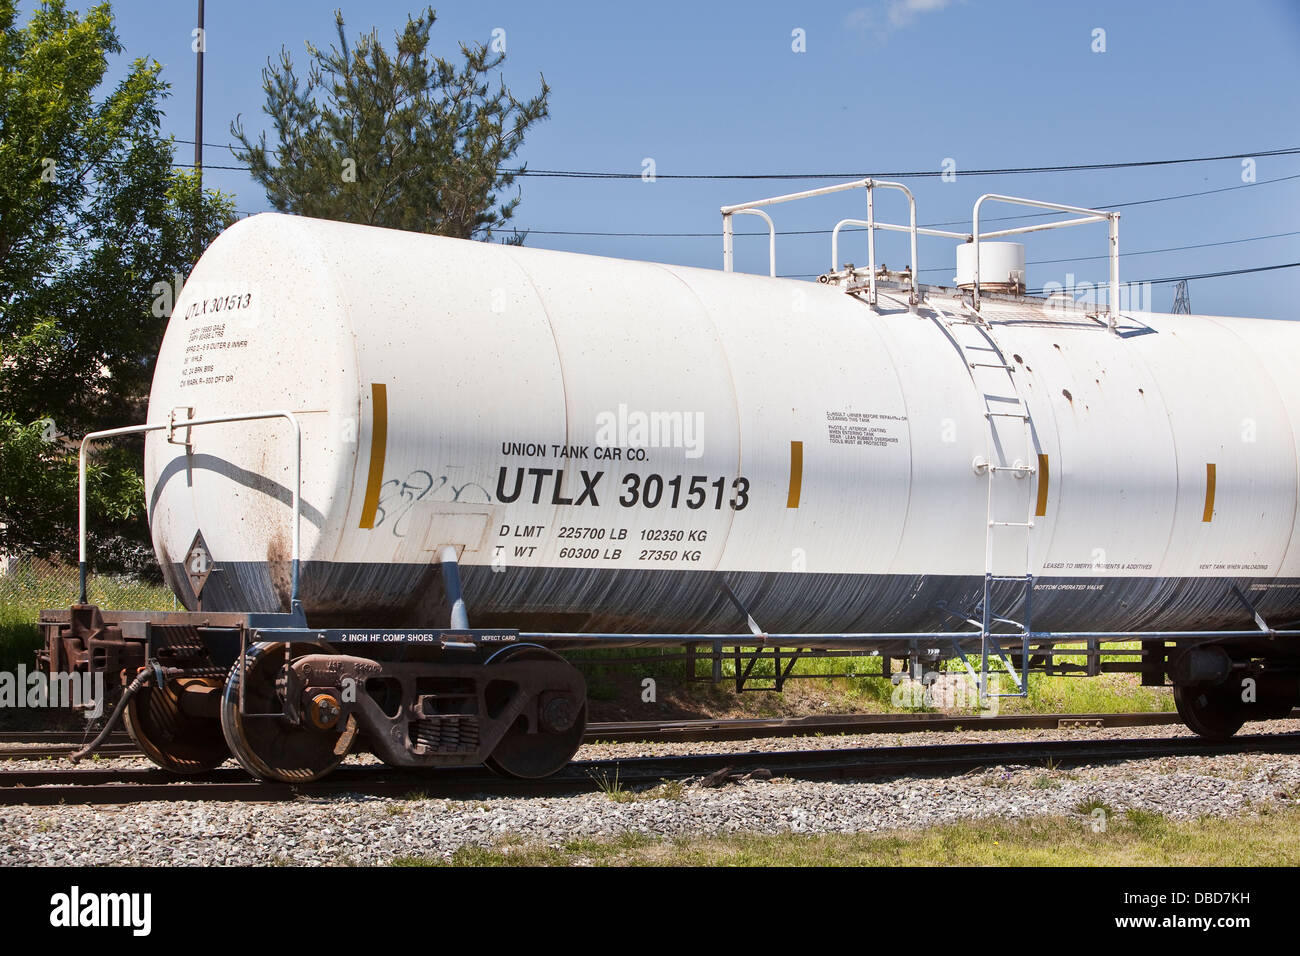 UTLX 301513 tank car owned by Union Tank Car Company is pictured by the Verso mill in Bucksport, Maine Stock Photo